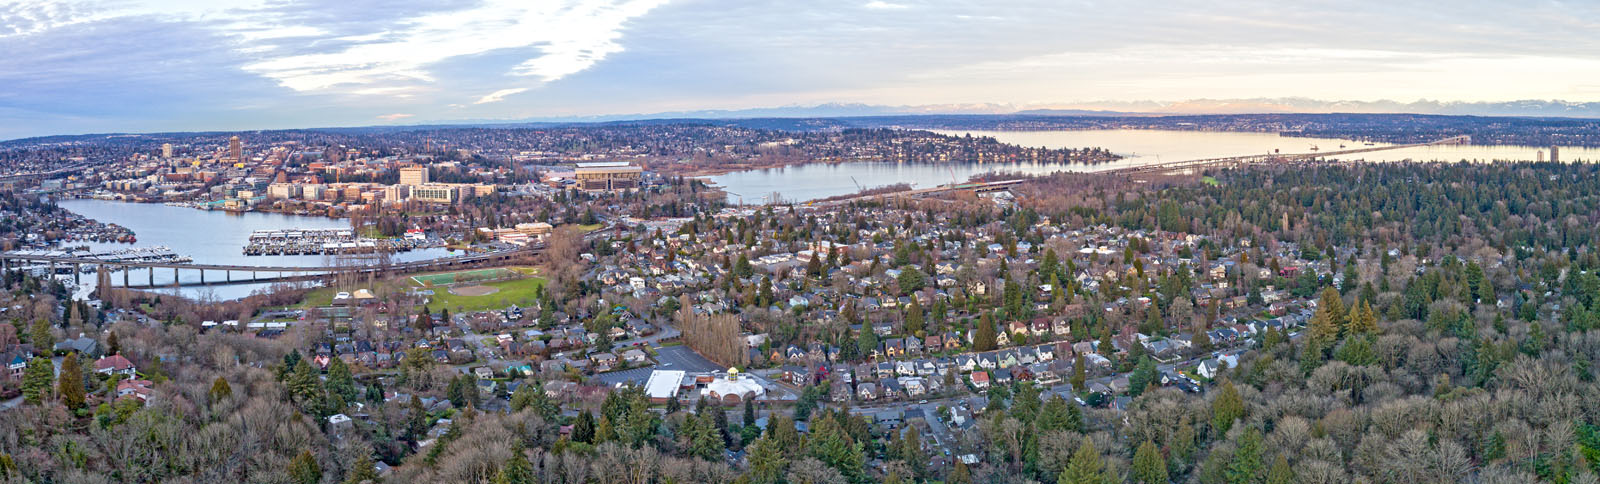 Aerial view of the University of Washington